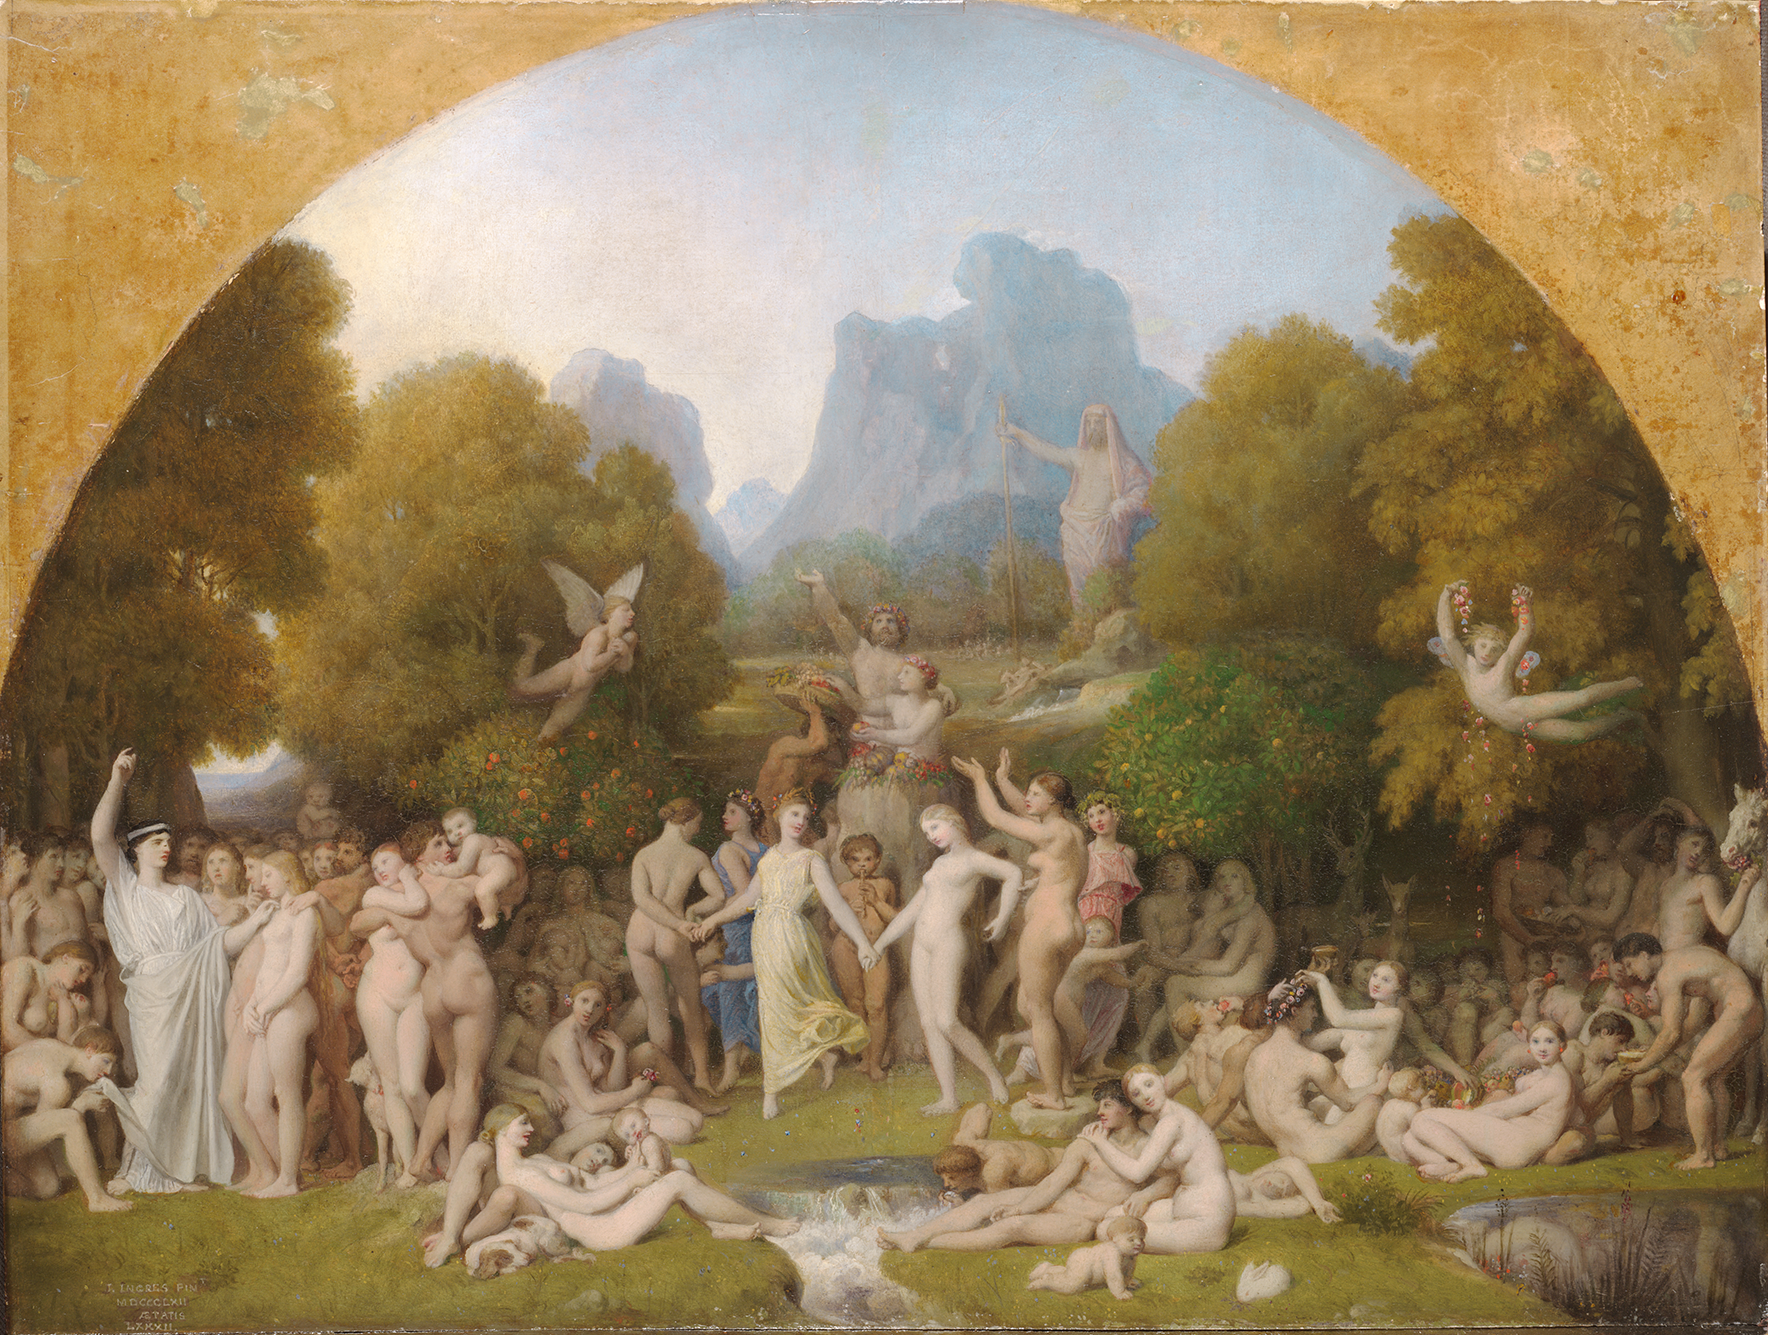 A painting depicting a large group of nude women huddled around a stone statue in a forest. Above them, are people with white wings flying and grabbing fruit from the trees. In the background is a larger statue that is overshadowed by a vast rocky cliff.